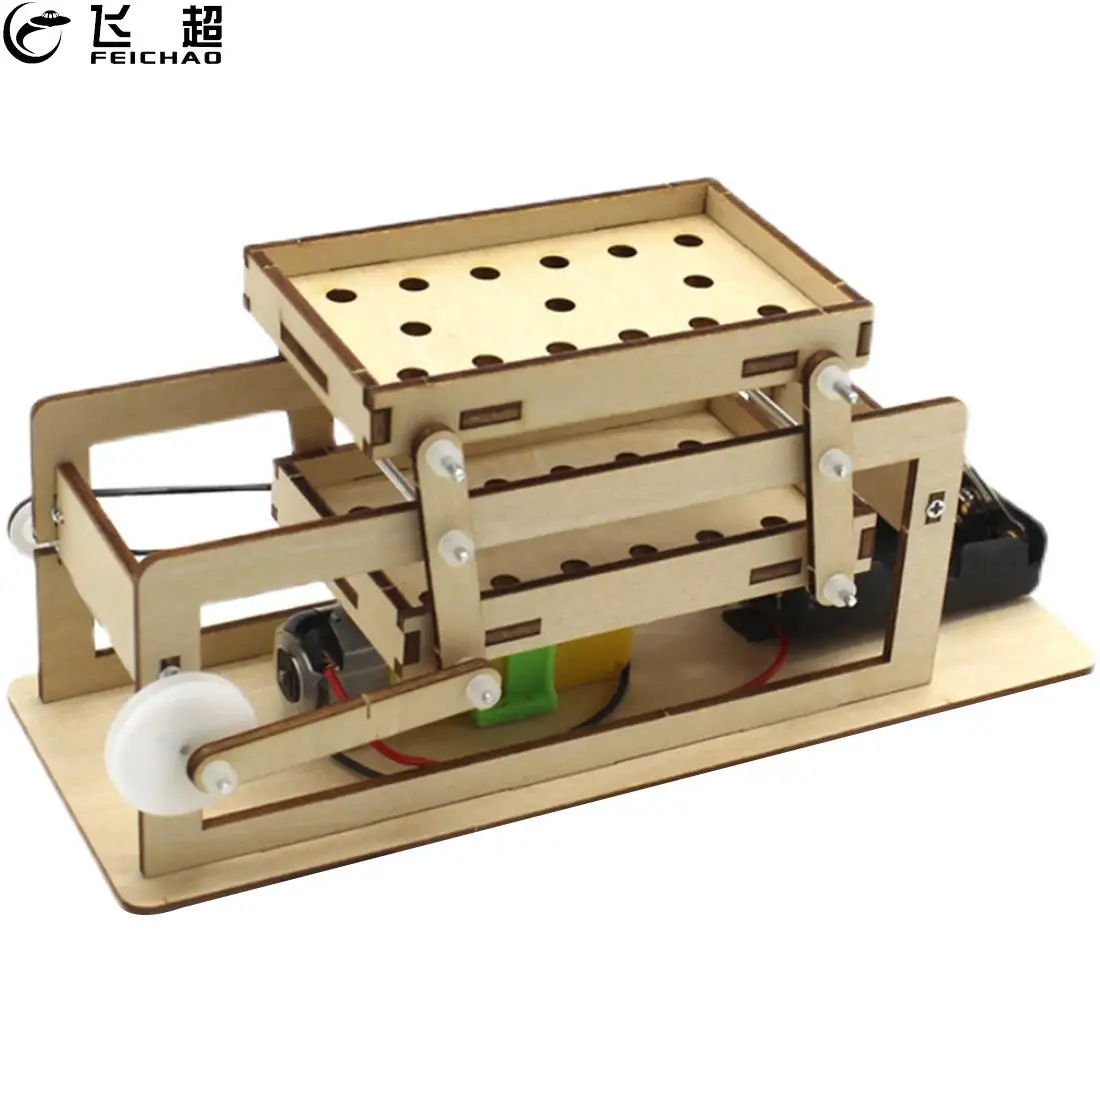 

DIY Electric Wooden Sieve Model Student Technology Making Inventions Scientific Laboratory Equipment Science Educational Toys